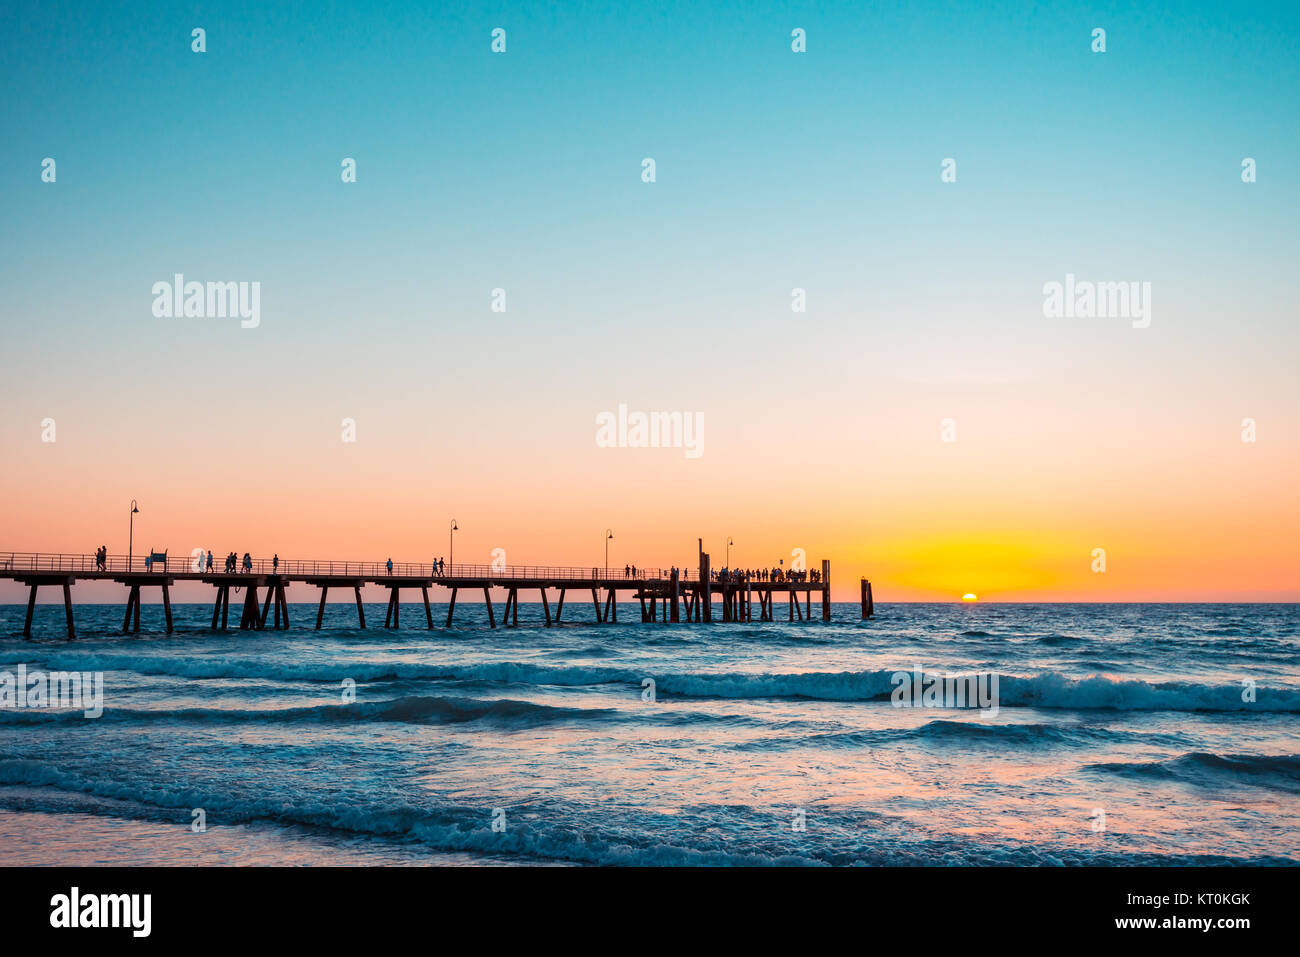 Beautiful warm sunset with people on the jetty at Glenelg beach, South Australia Stock Photo